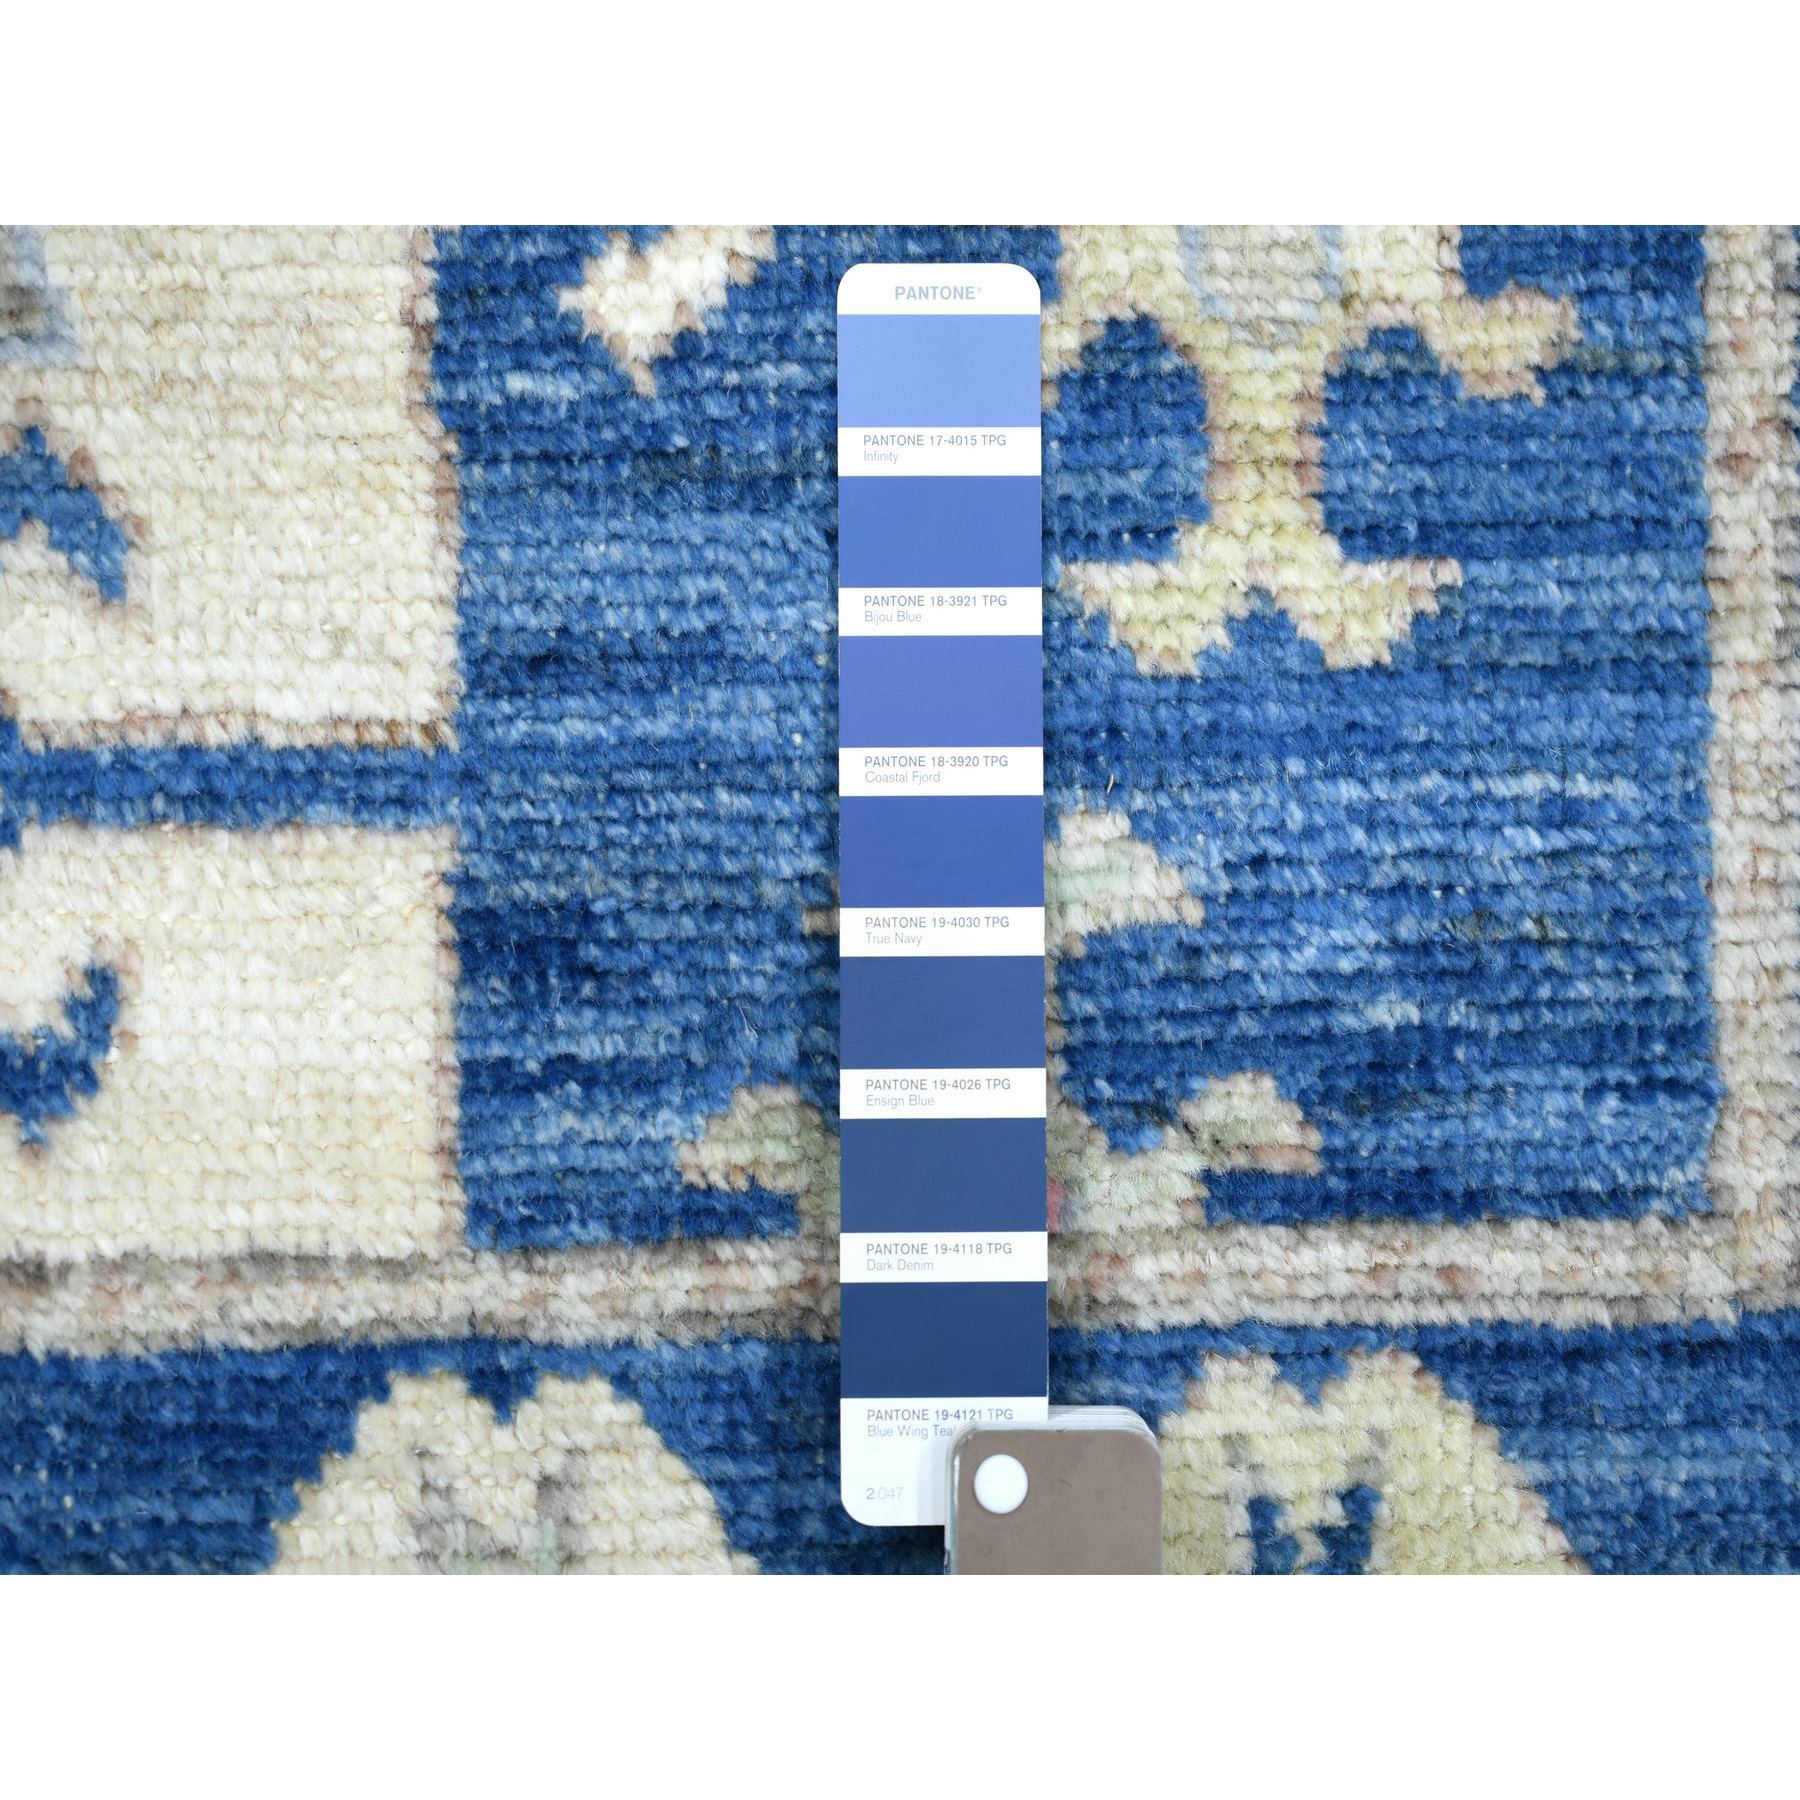 4'1"x12'1" Denim Blue, Anatolian Village Inspired with Large Elements Natural Dyes, Soft and Supple Wool Hand Woven, Wide Runner Oriental Rug 